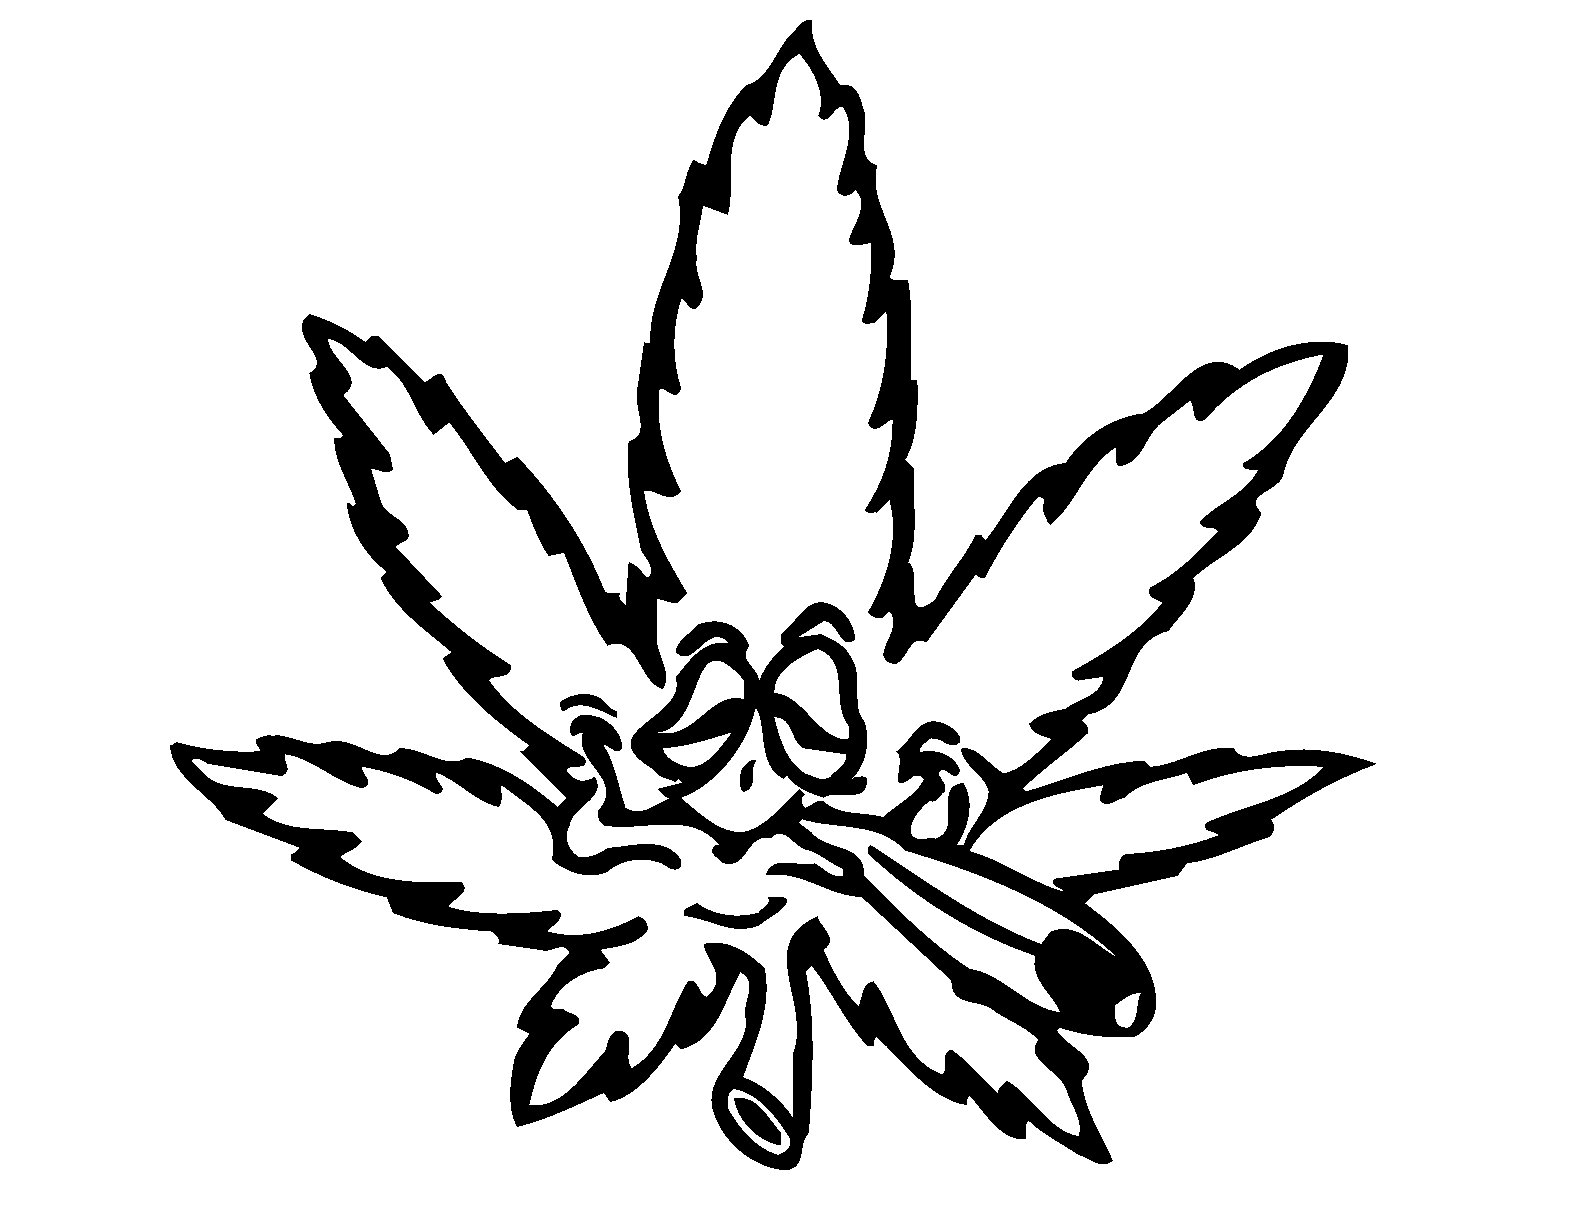 Weed Symbol Drawing   Clipart Panda   Free Clipart Images